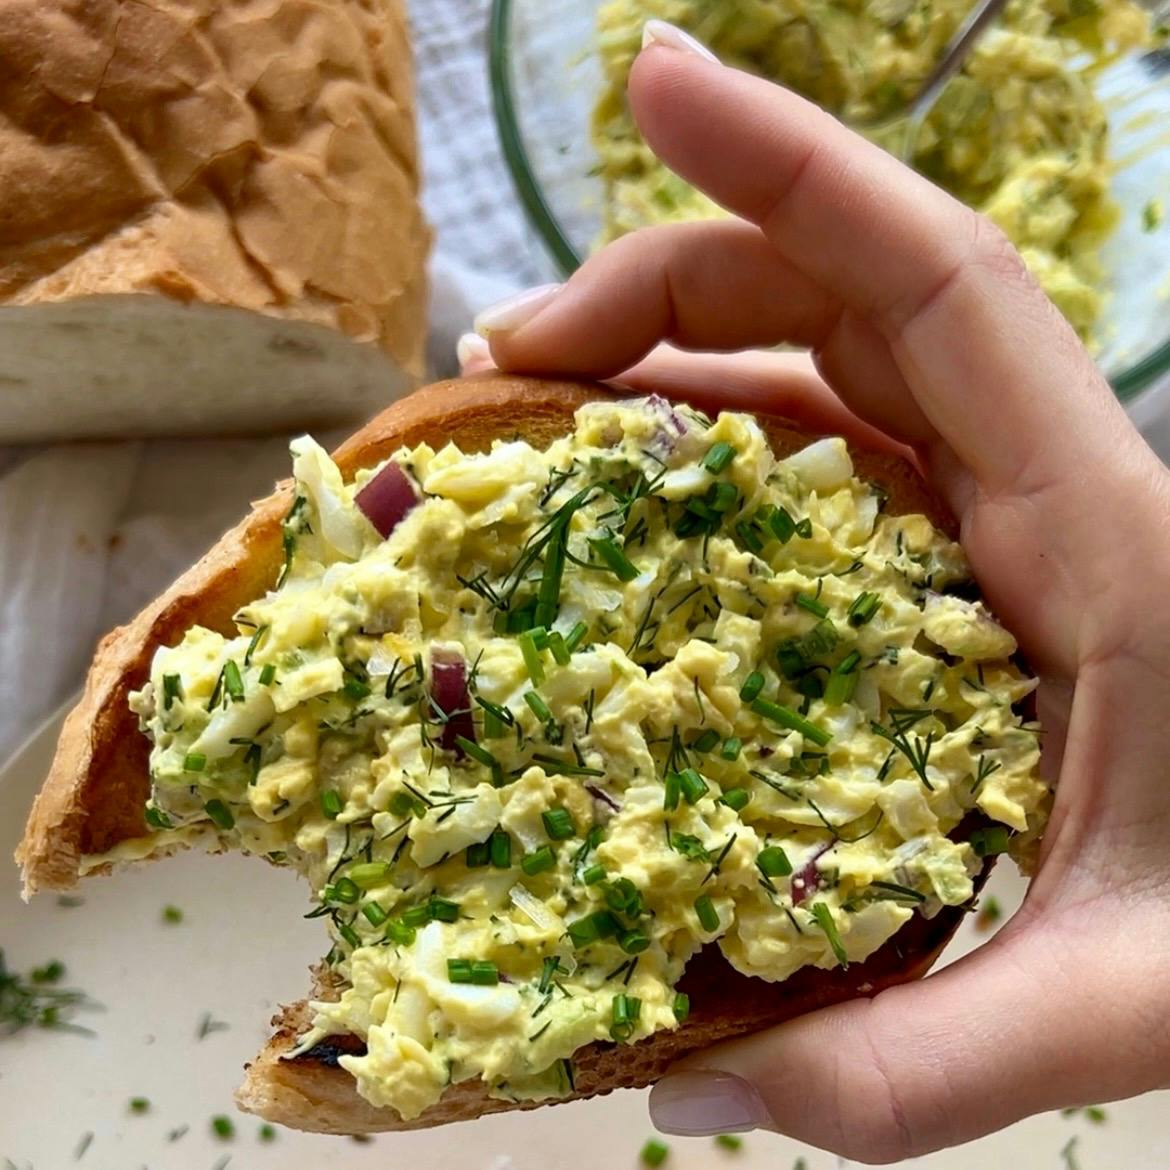 Picture for Avocado Egg Salad